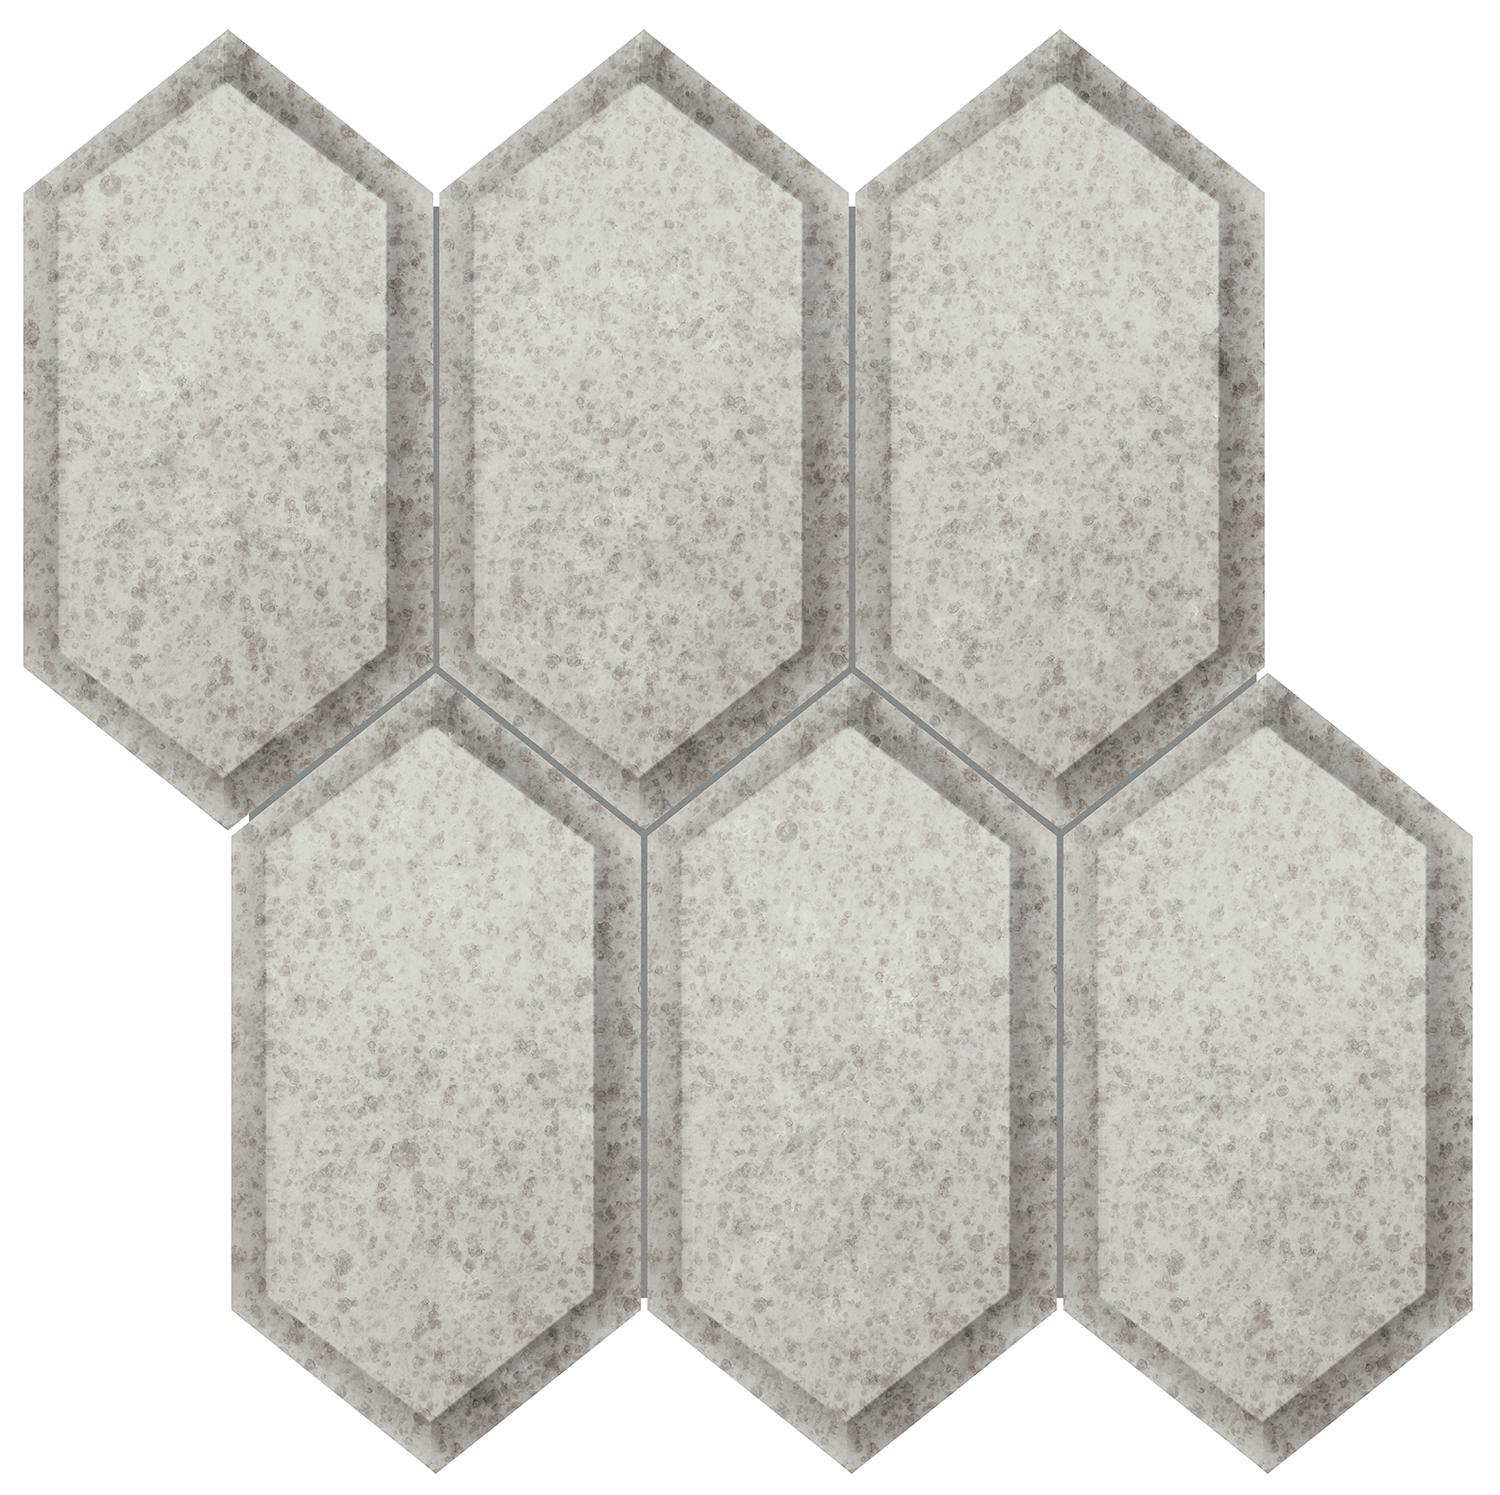 antique silver hexagon pattern fused glass mosaic from obsidian anatolia collection distributed by surface group international glossy finish beveled edge mesh shape